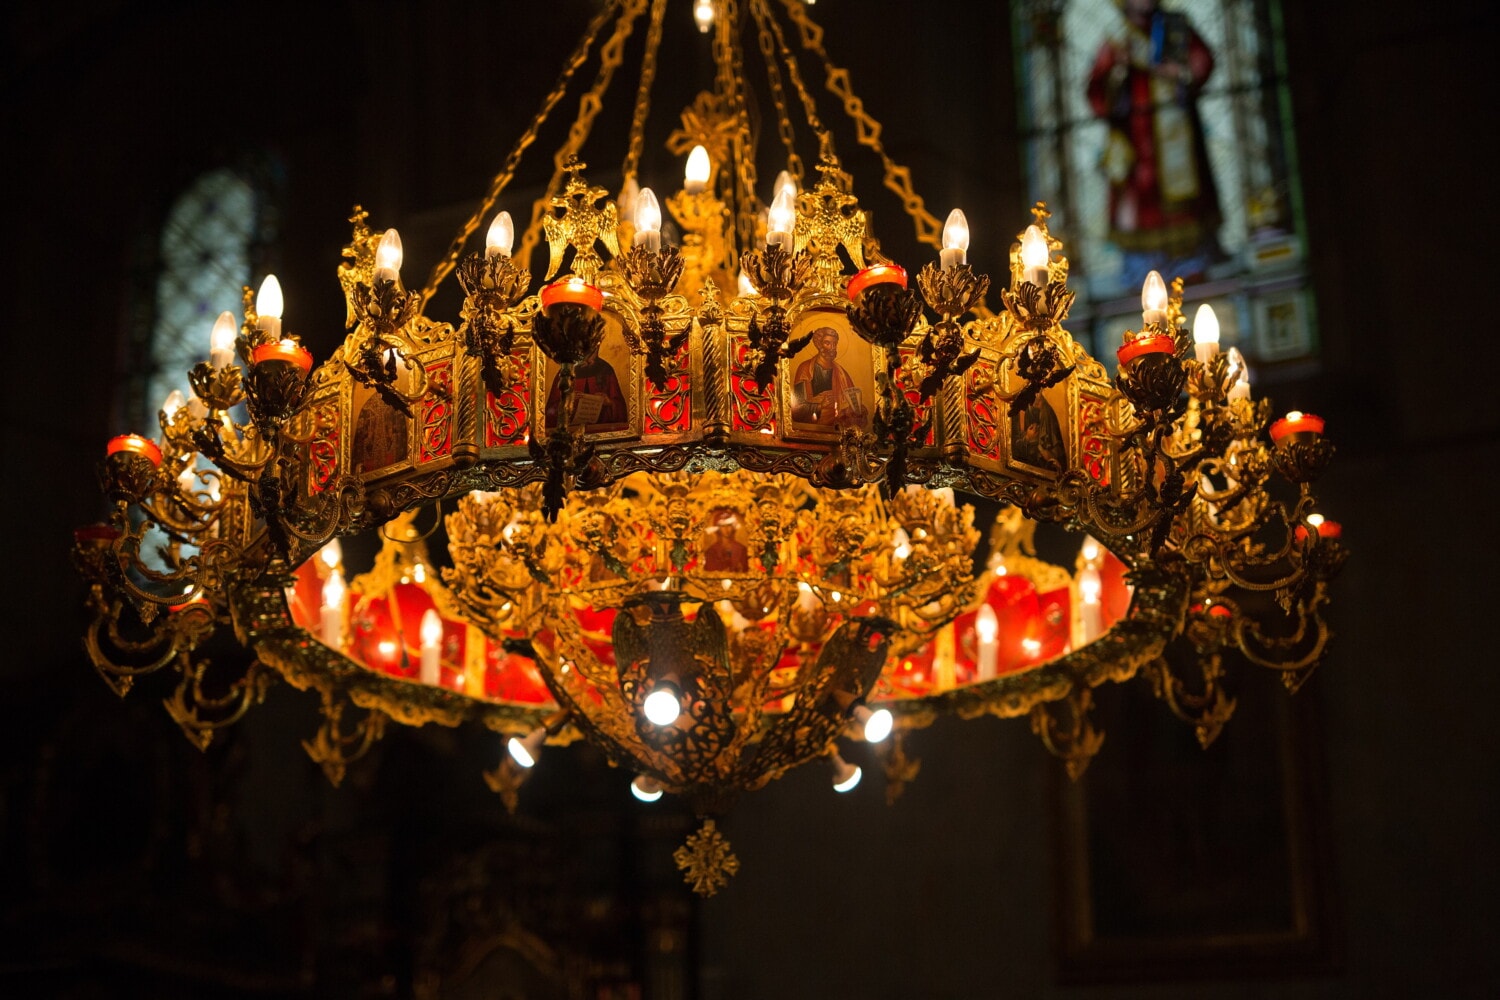 Free picture: church, chandelier, candles, candlelight, golden glow ...